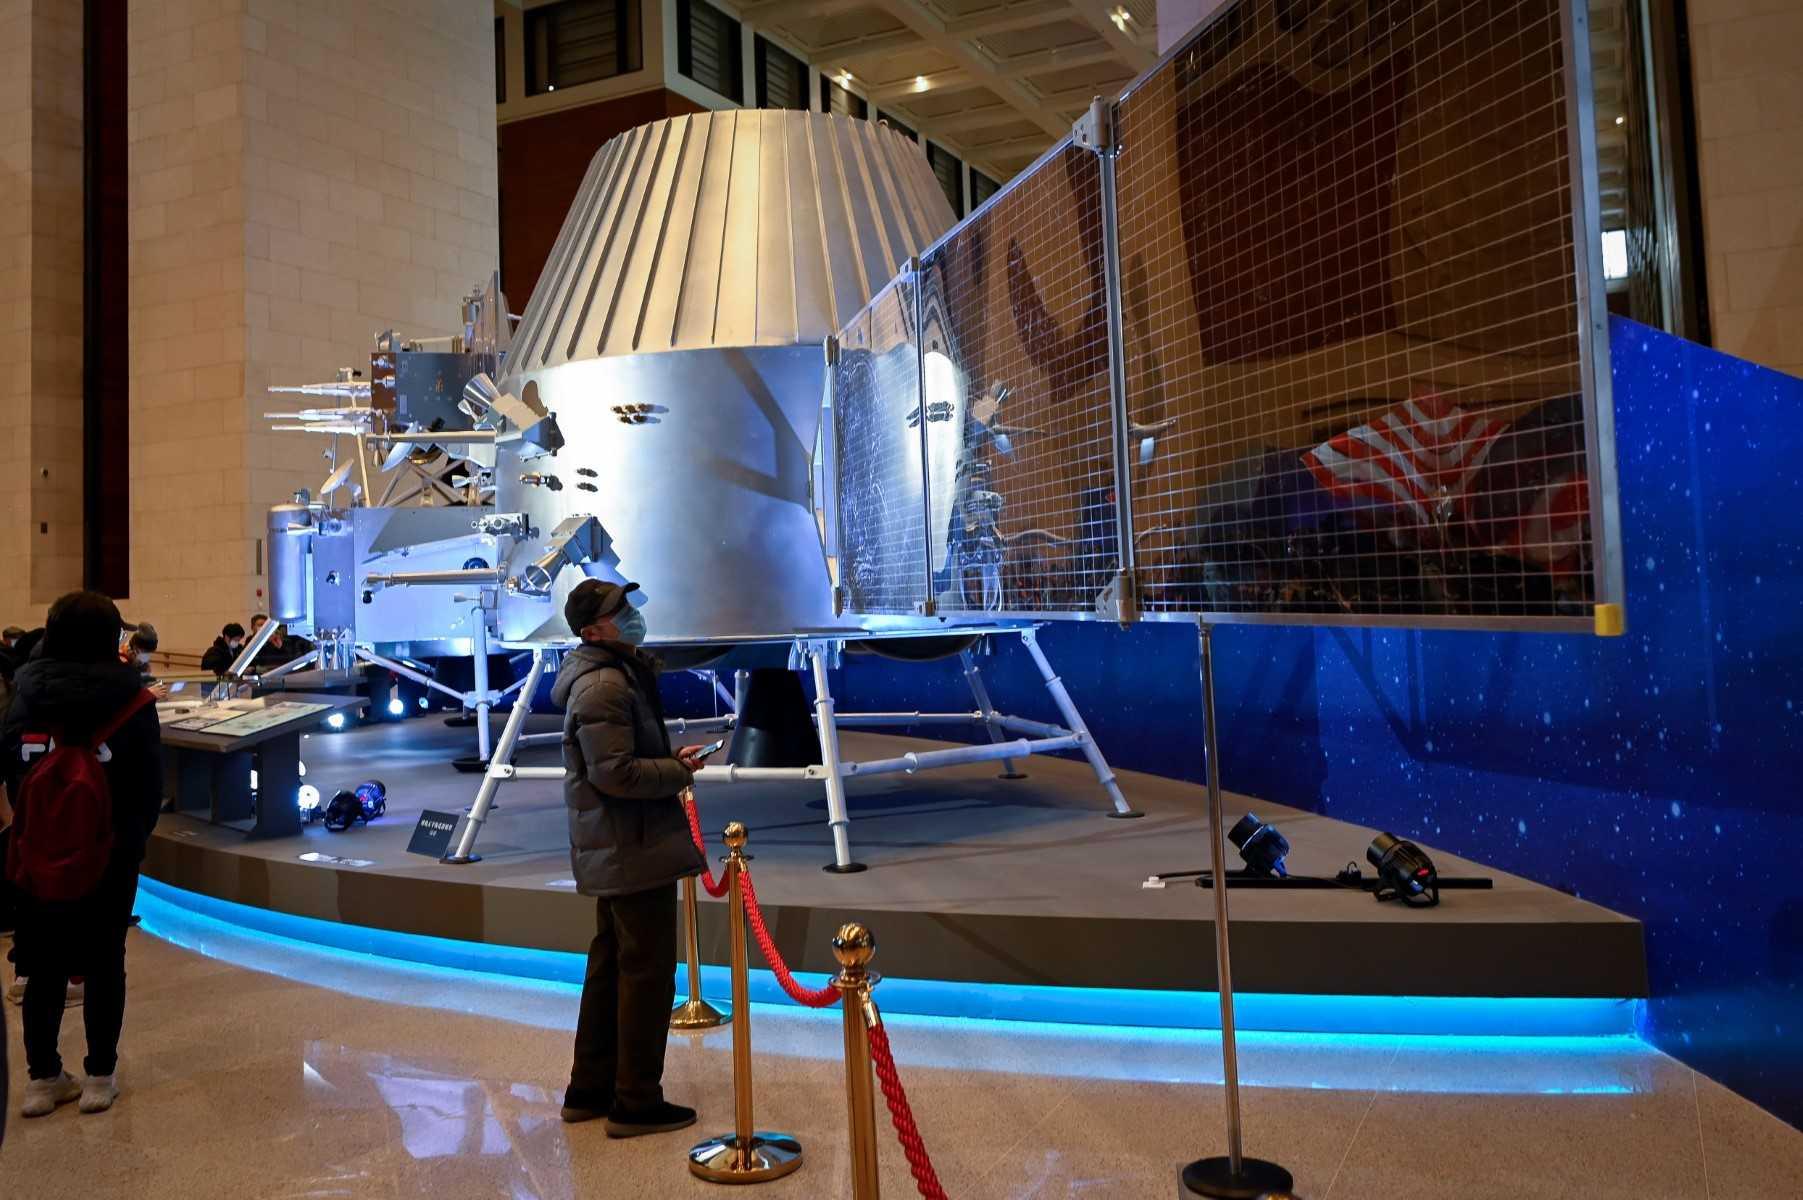 A man looks at a model of a lunar orbiter from China's lunar exploration program Chang'e-5 Mission during an exhibition at the National Museum of China in Beijing on March 4, 2021. Photo: AFP 